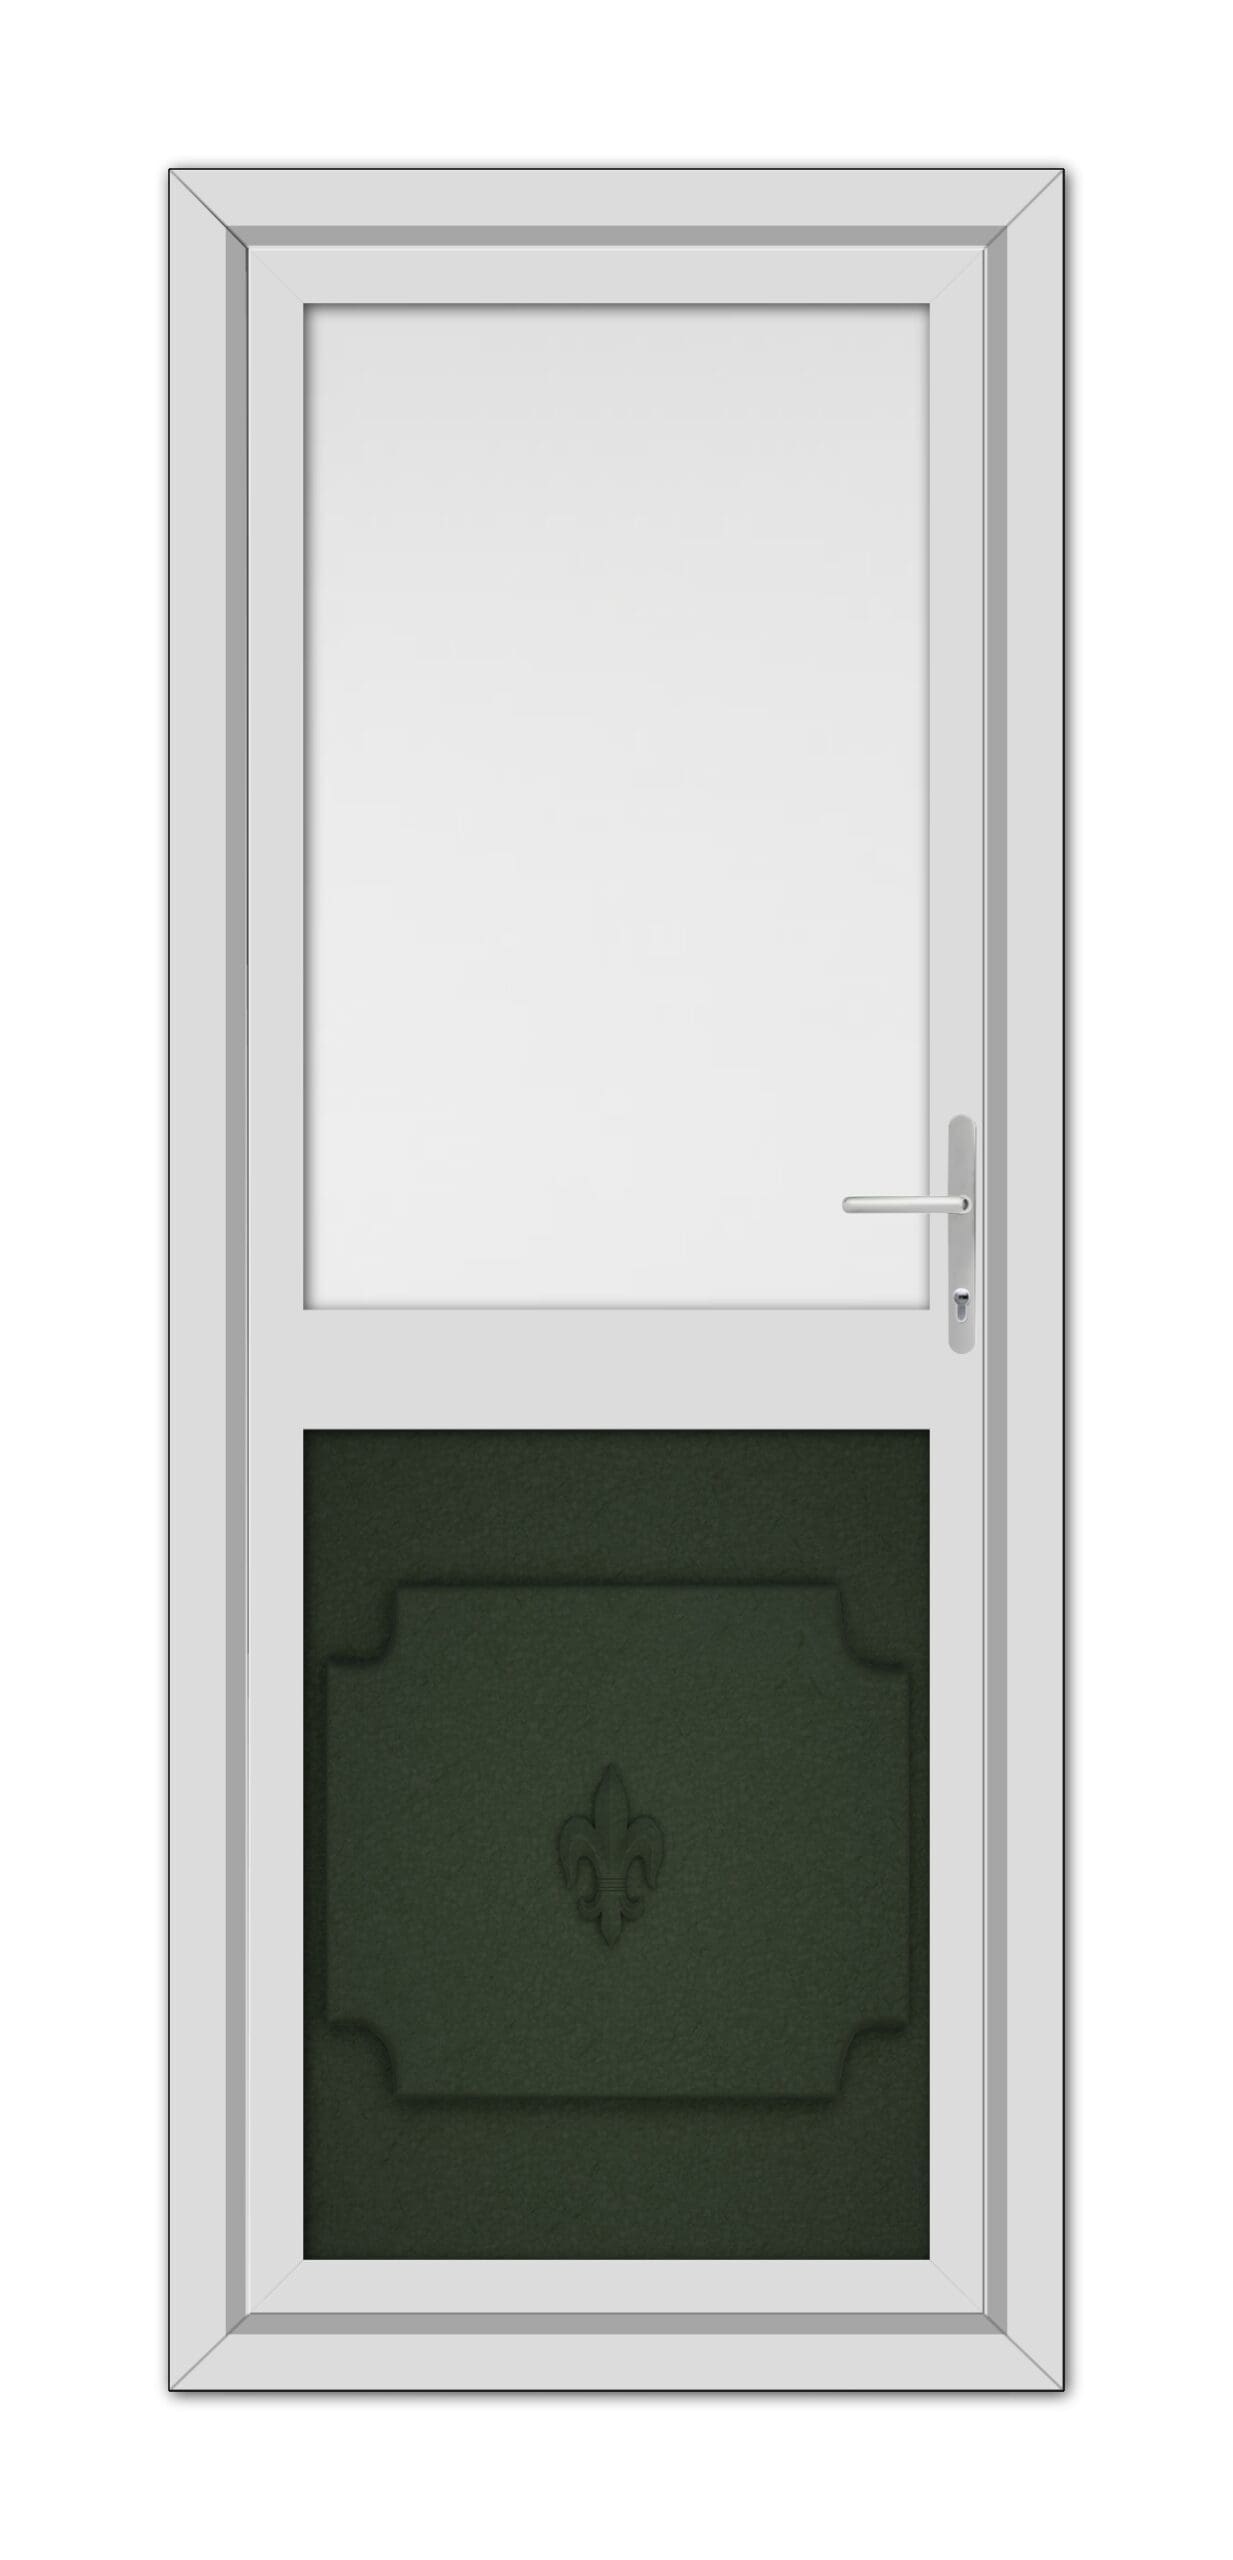 A modern Grey Abbey Half uPVC Back Door with a large square window on top and a decorative green panel with a fleur-de-lis design at the bottom, featuring a silver handle on the right.